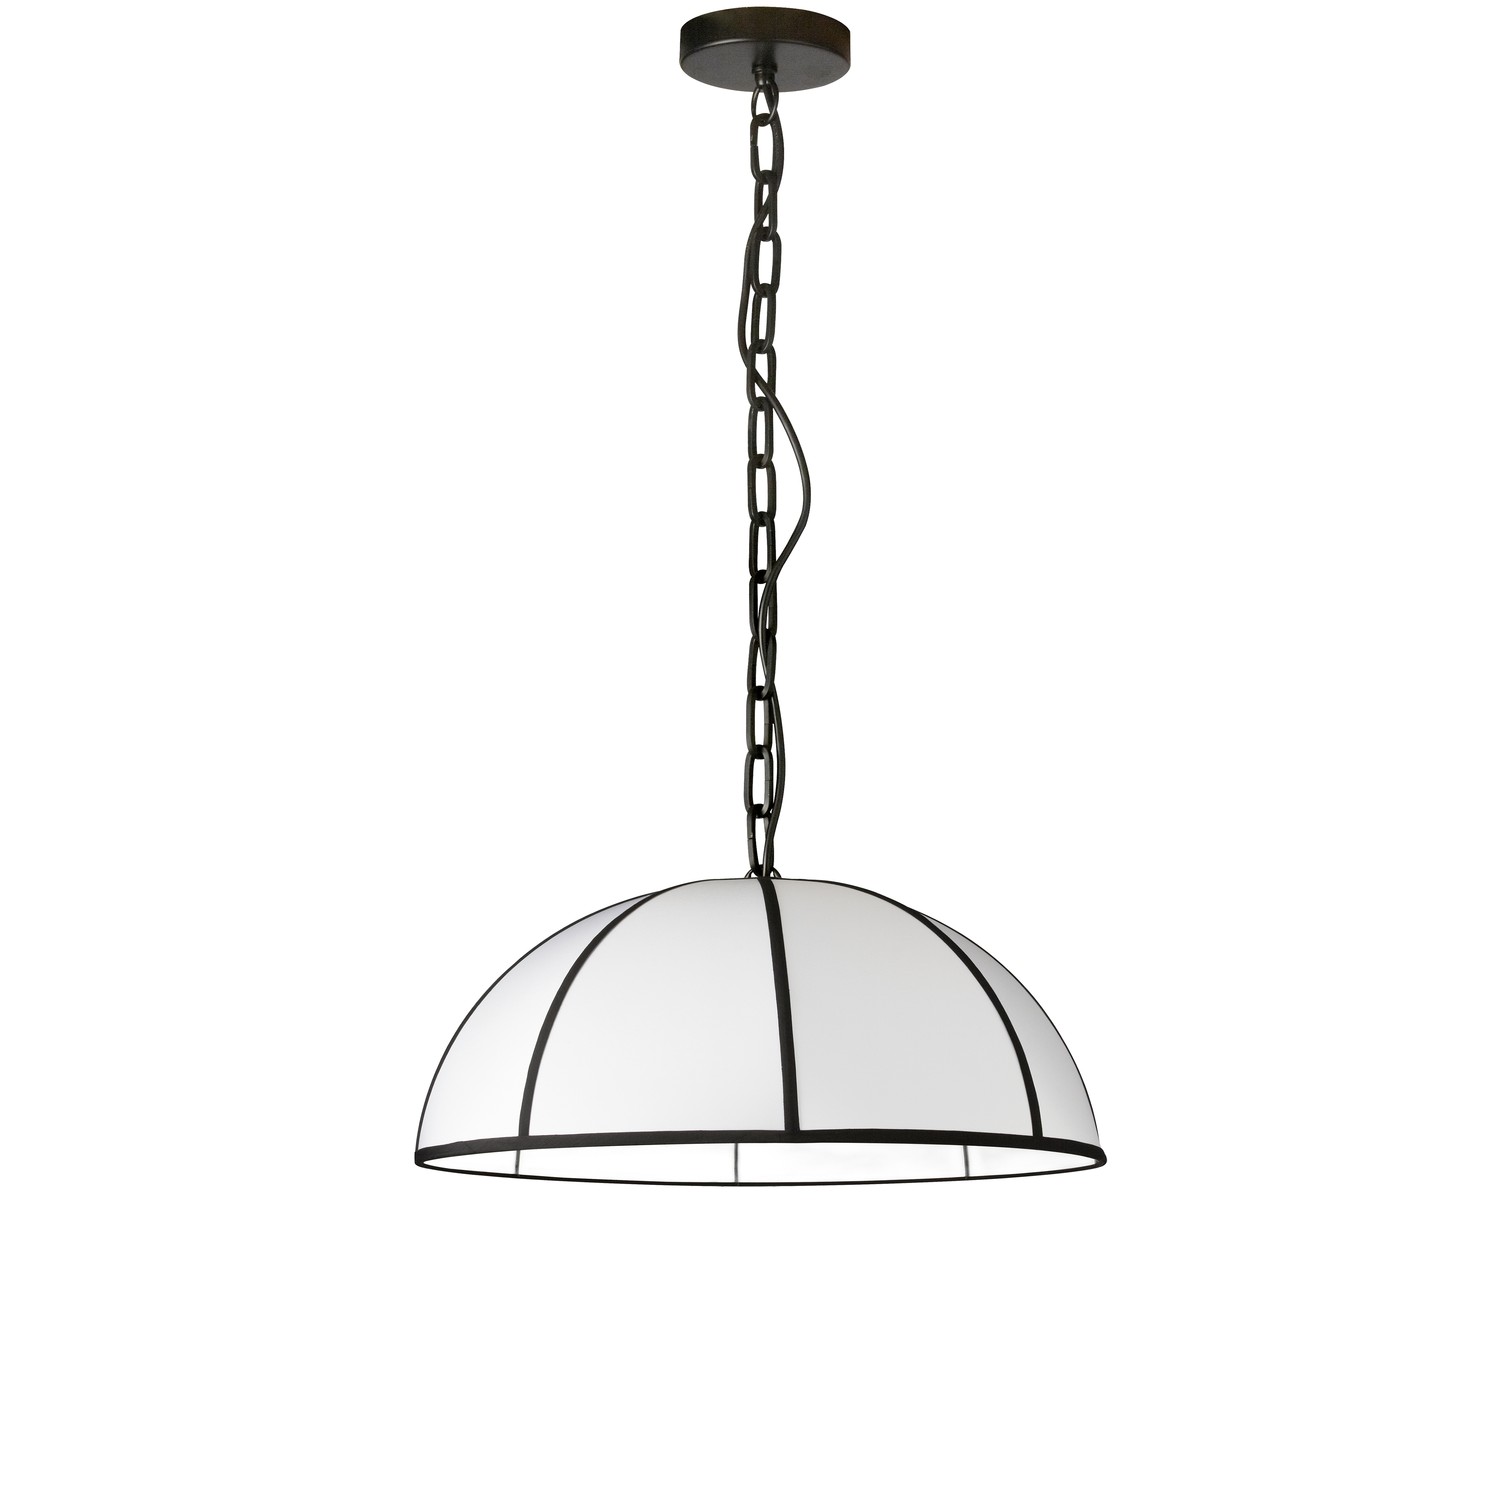 1 Light Incandescent Pendant, Matte Black with White Shade and Black Trim